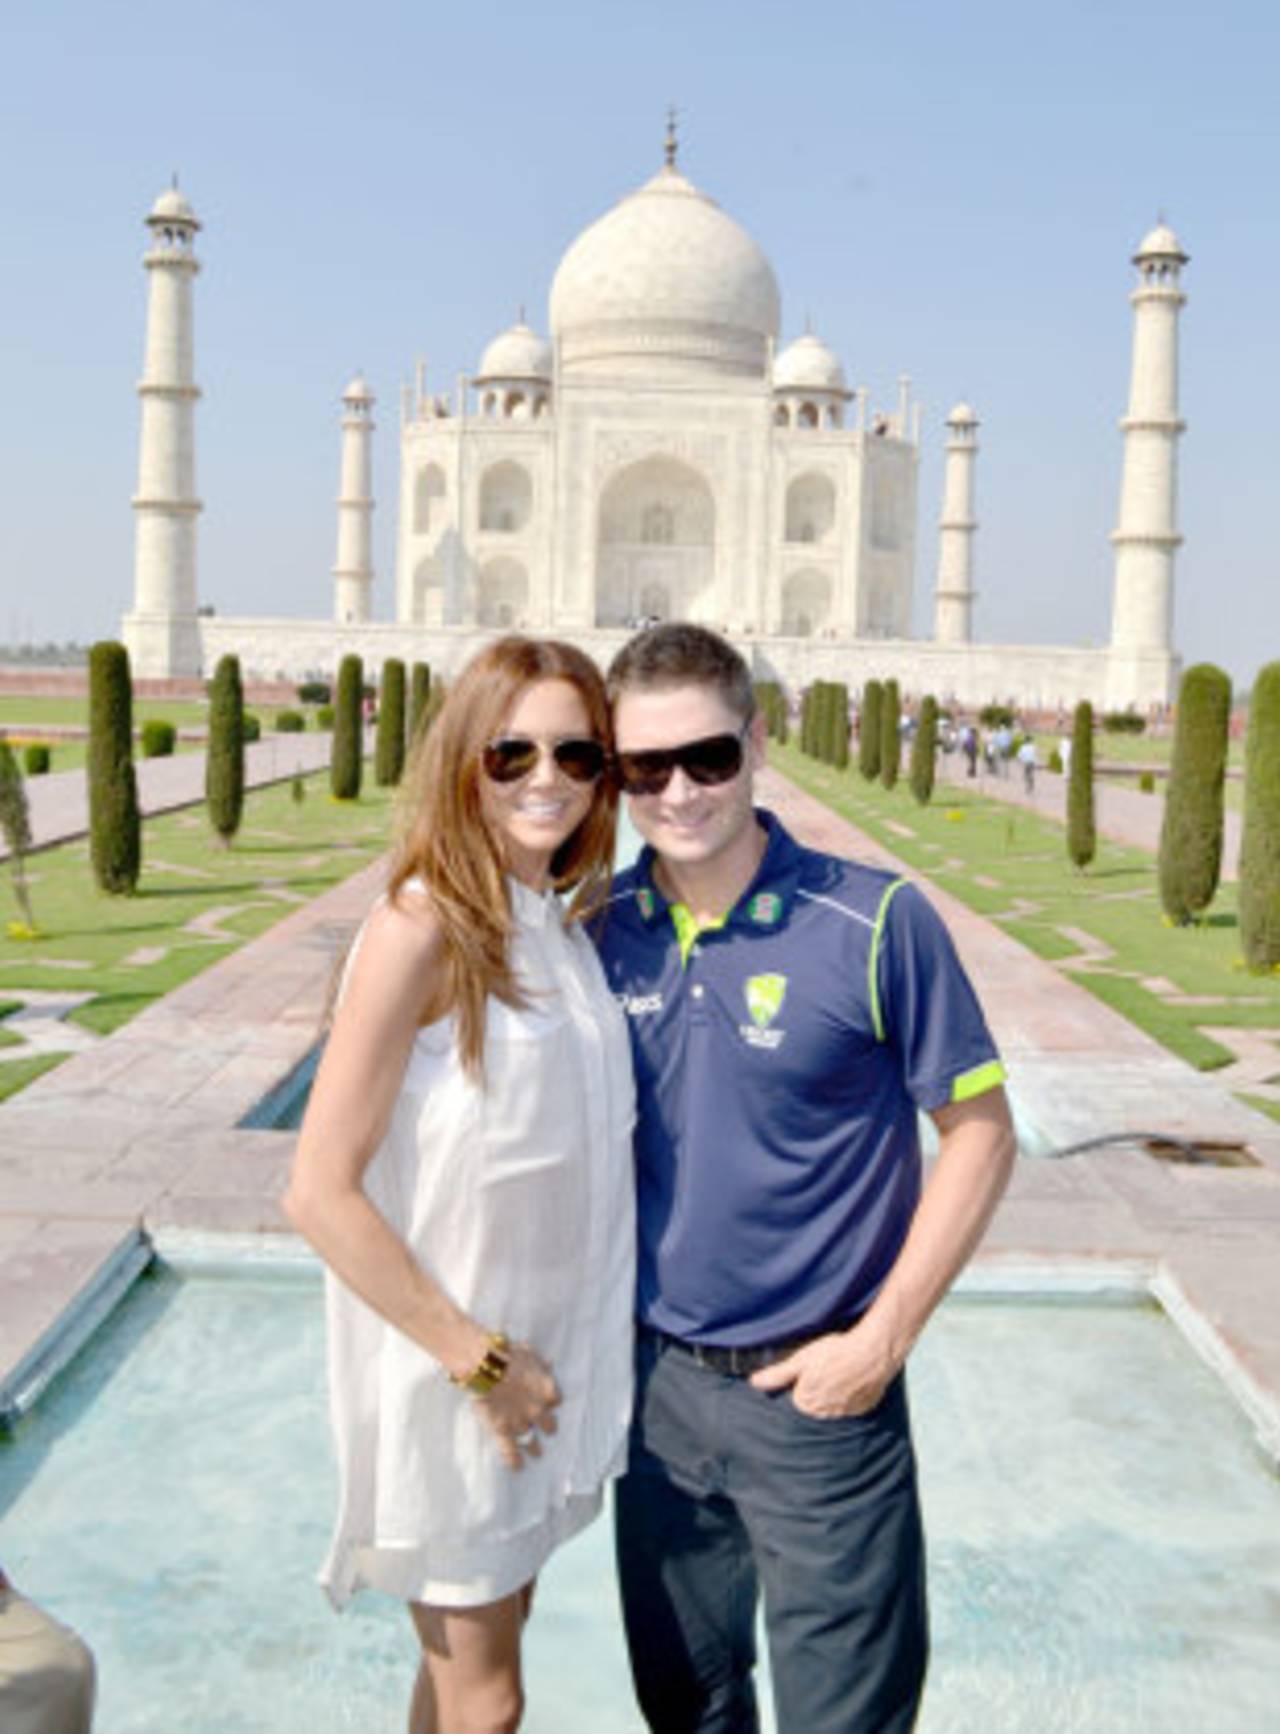 Michael Clarke with his wife Kyly at the Taj Mahal, Agra, March 7, 2013